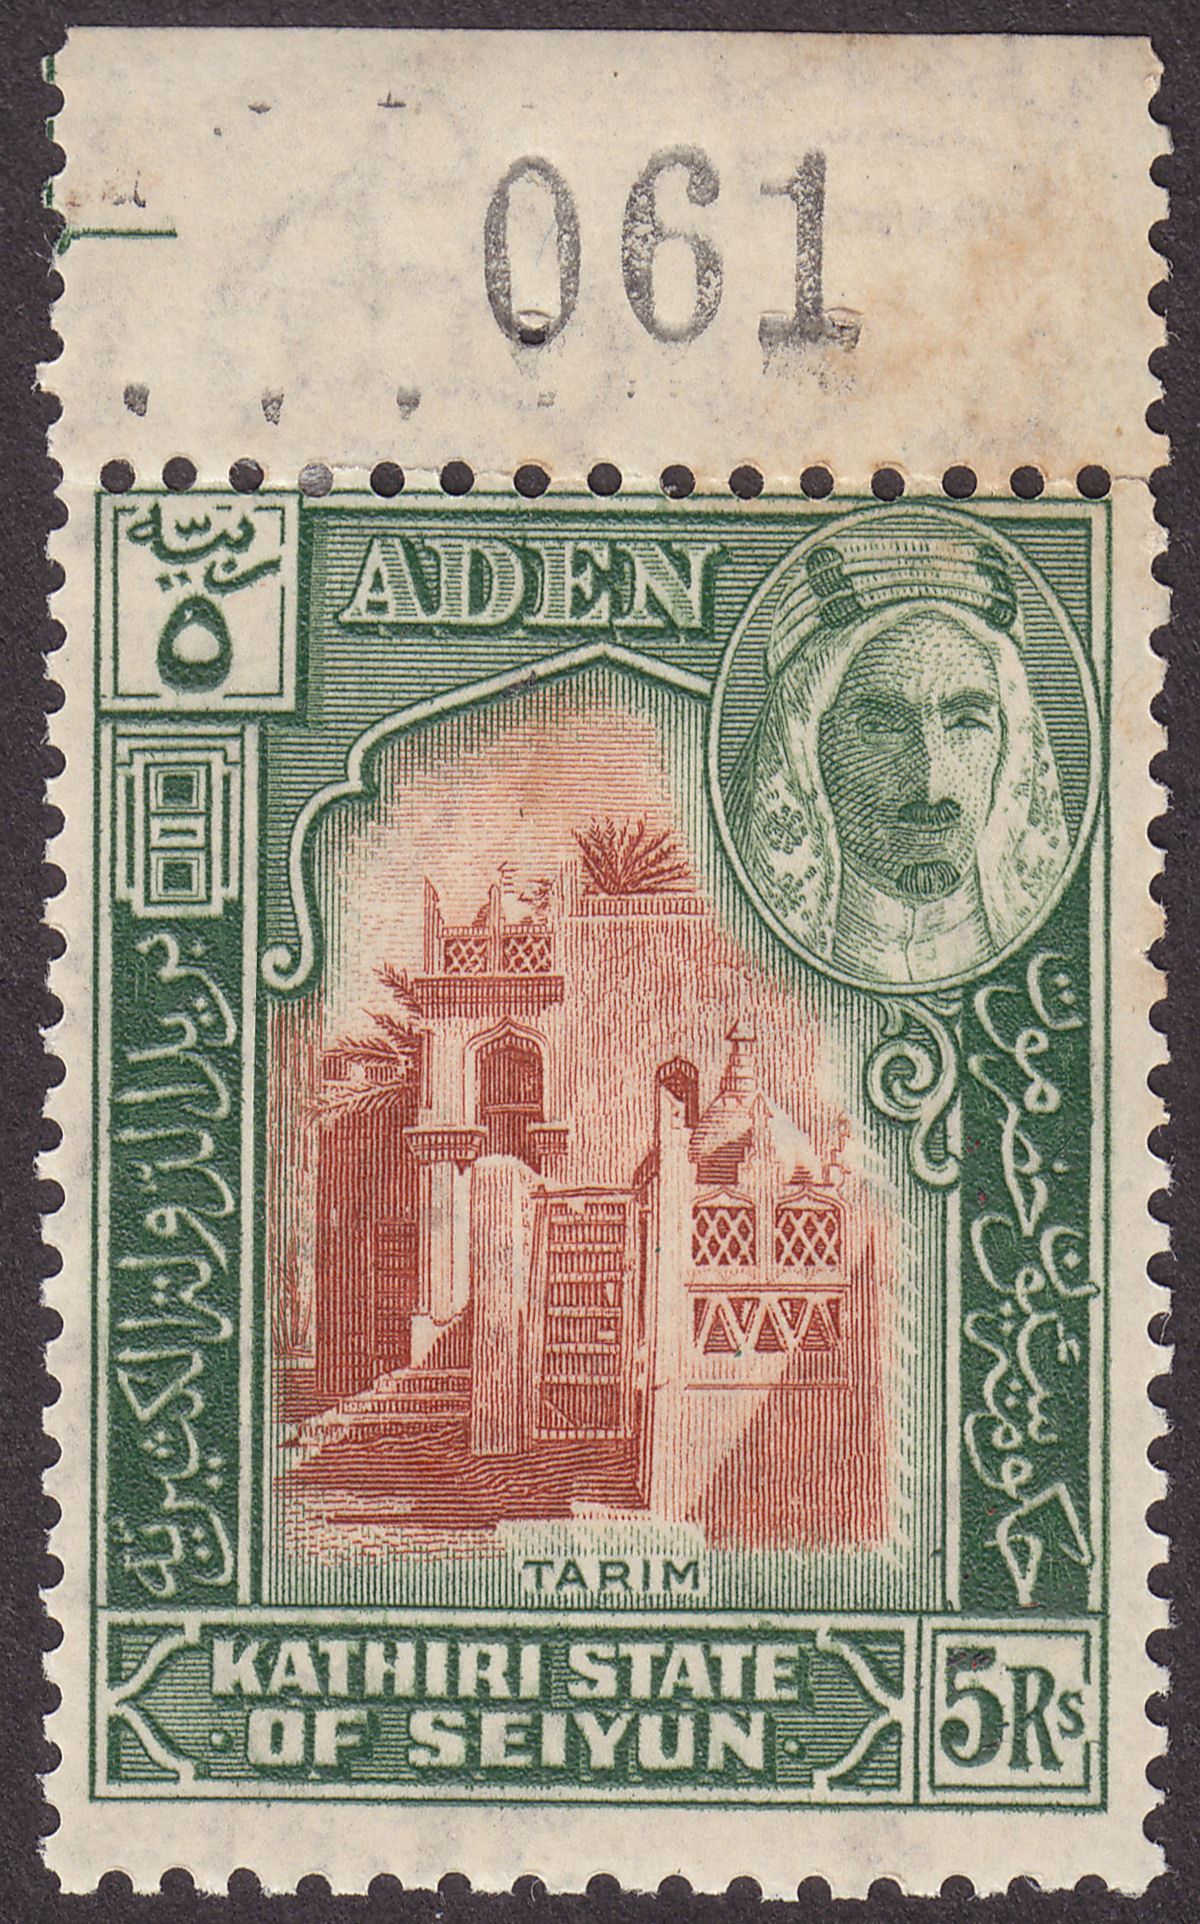 Aden Kathiri State Seiyun 1942 KGVI 5r Brown and Green Mint SG11 cat £38 toned